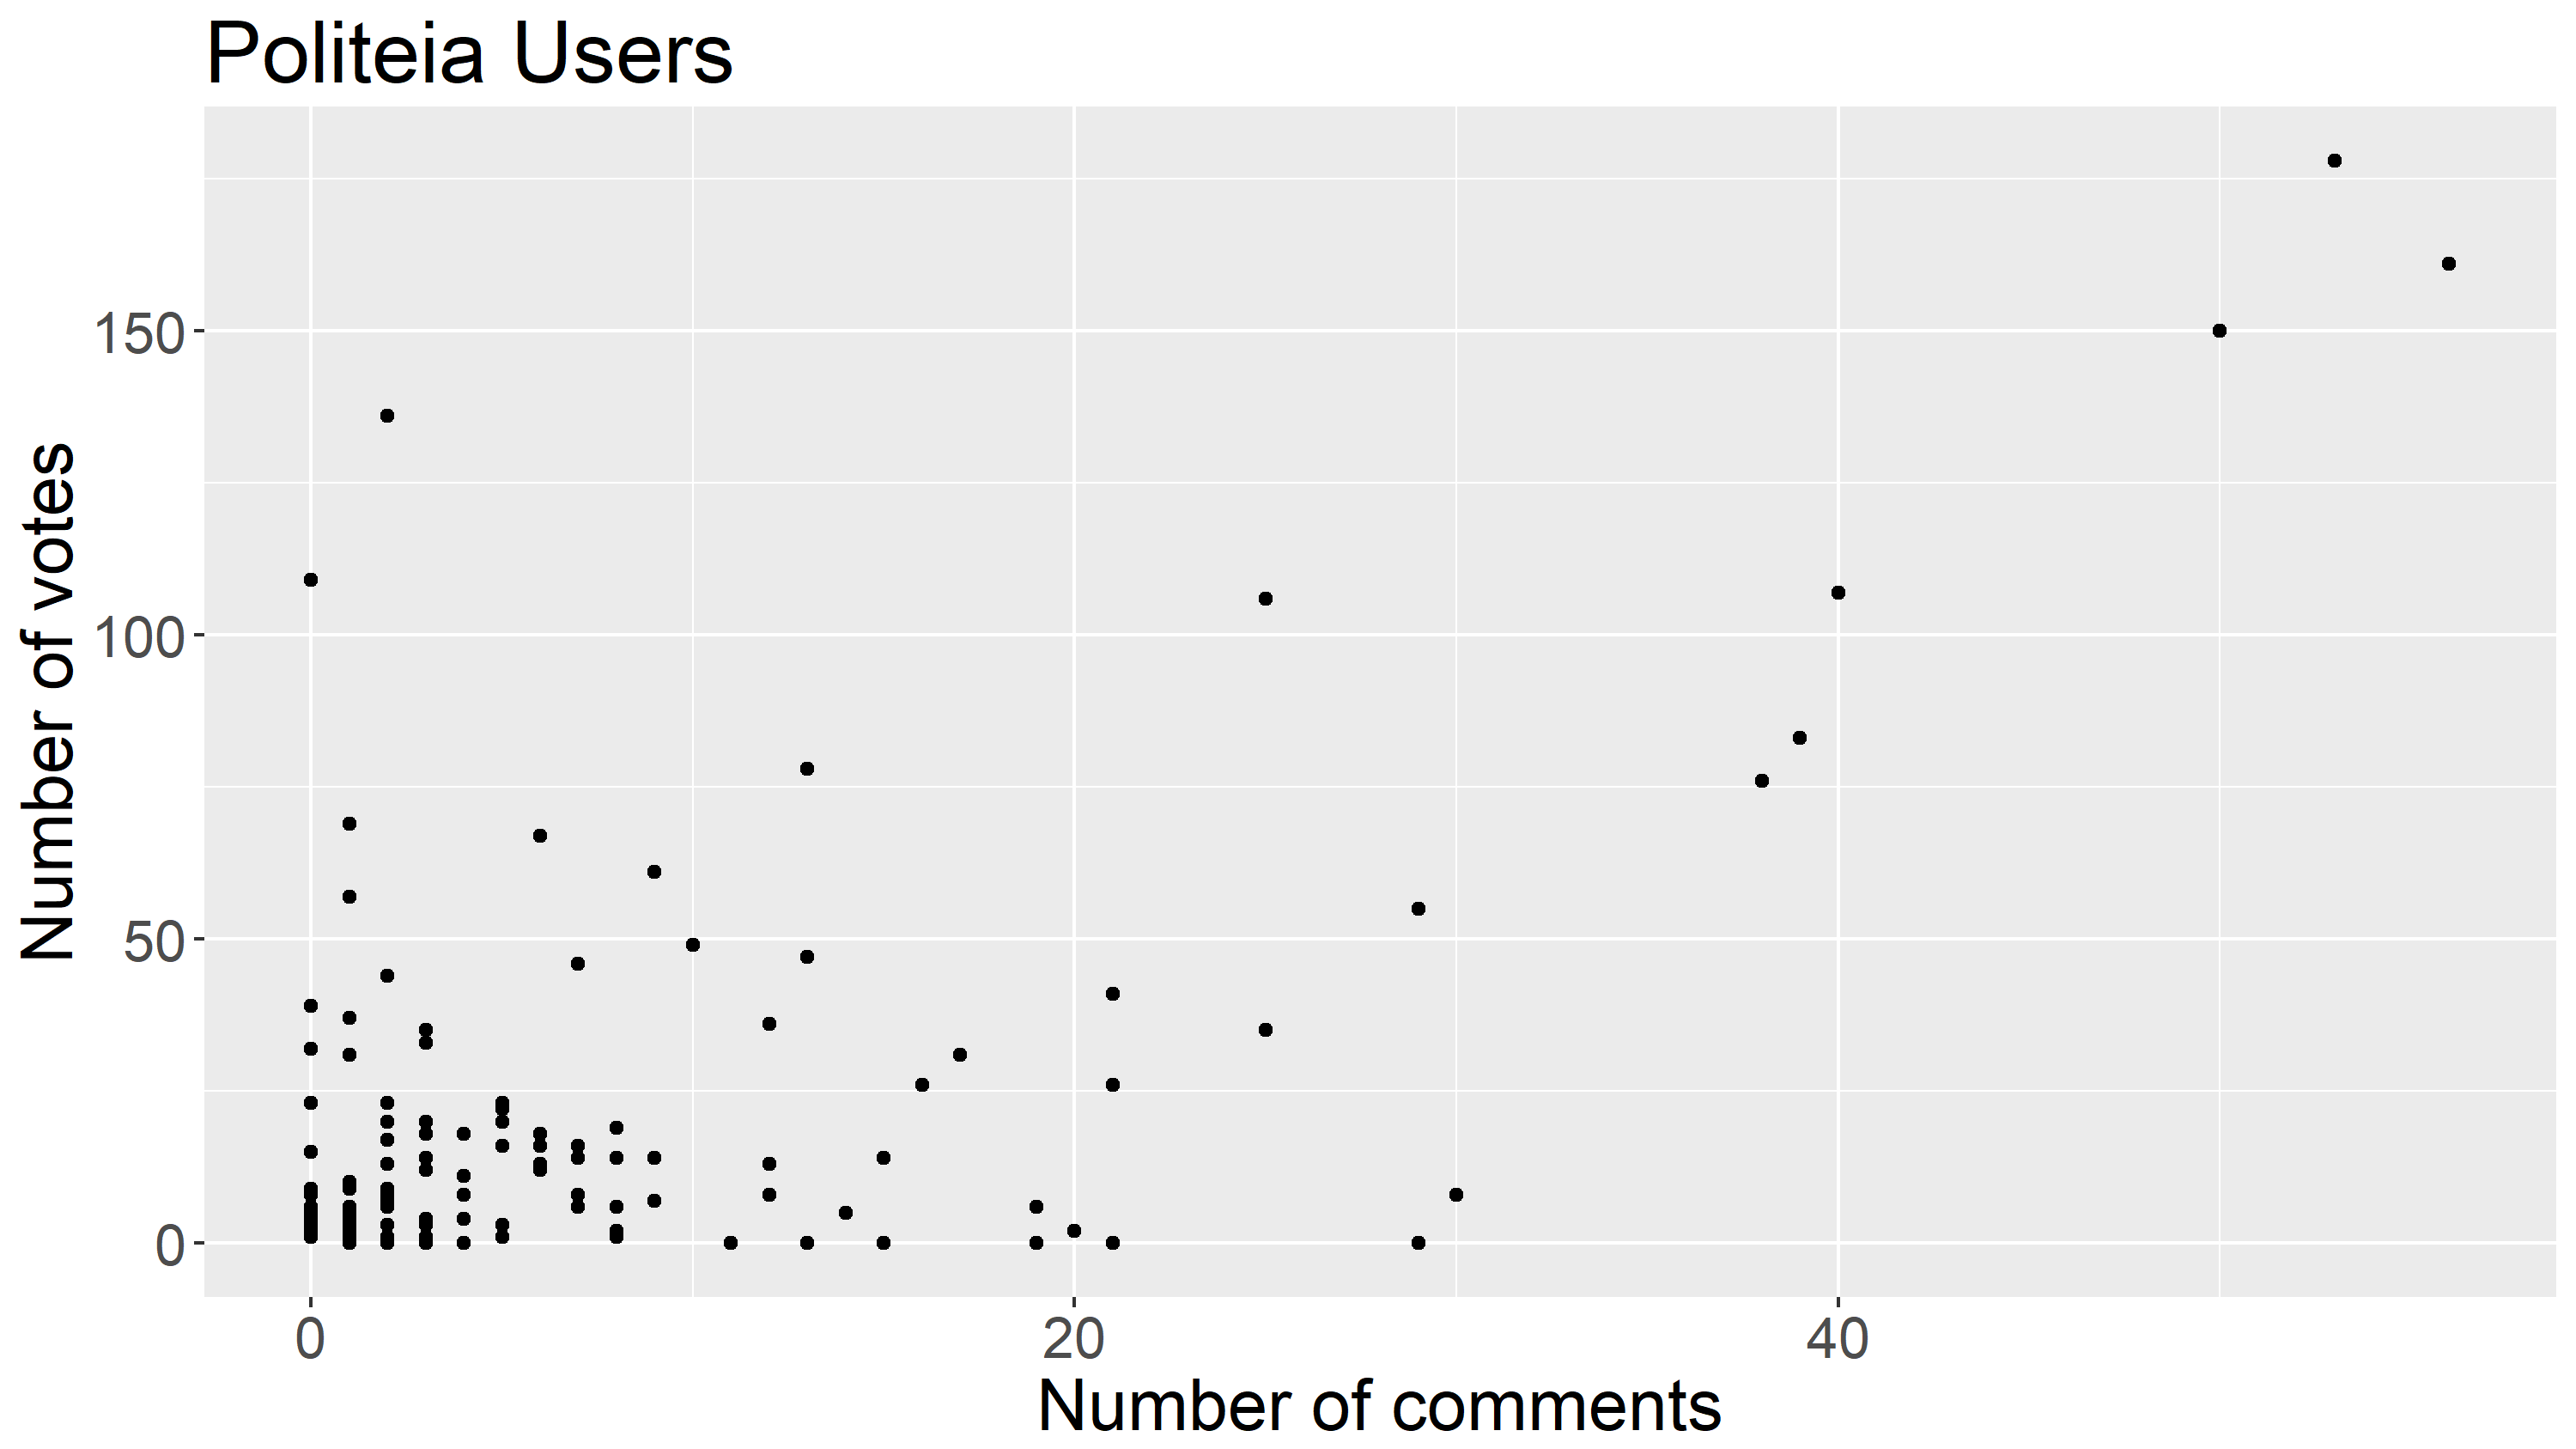 Scatterplot showing votes and comments per user